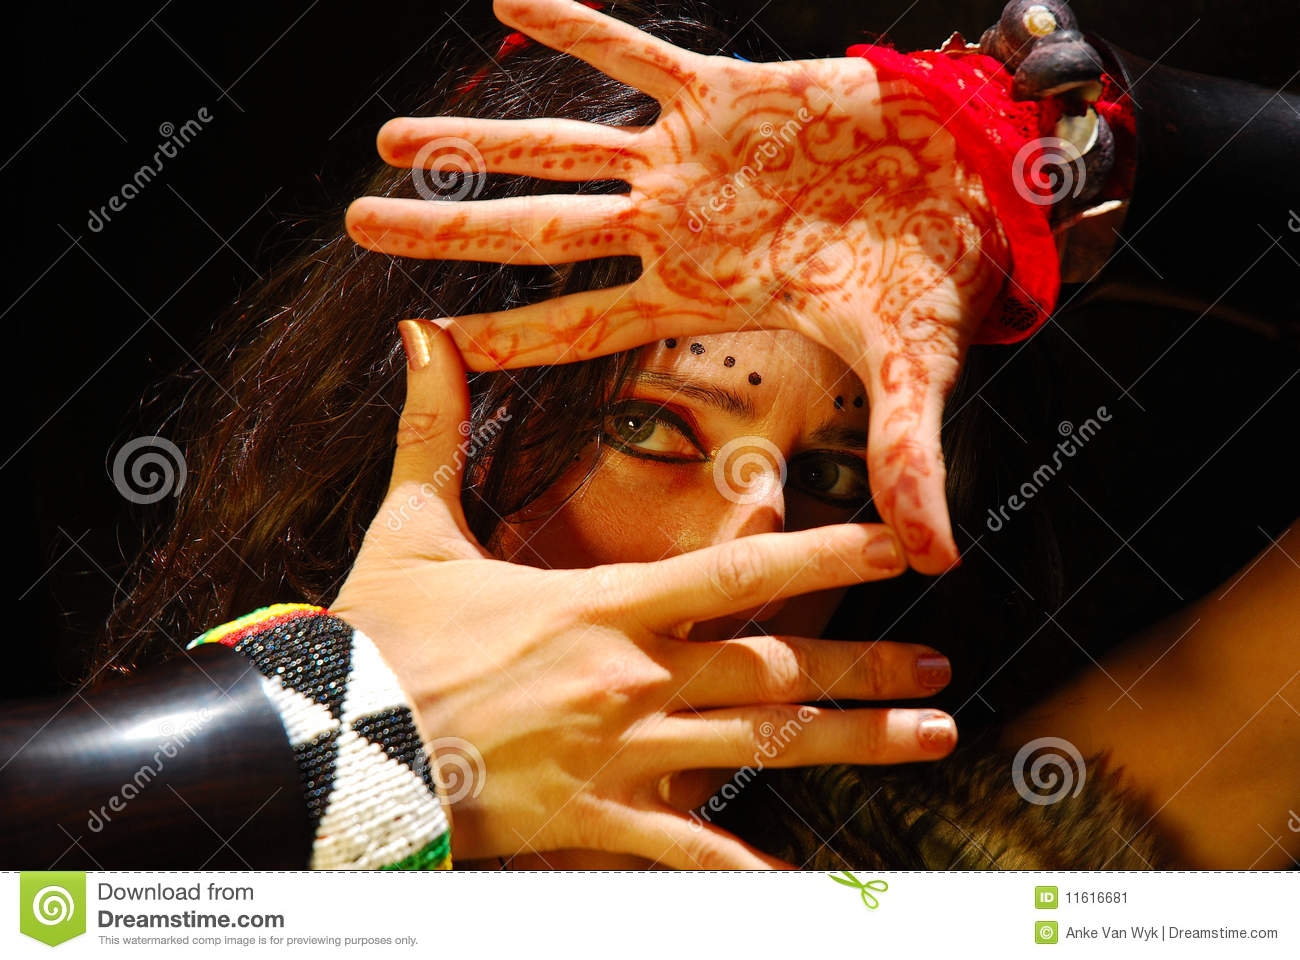 Dancer Woman Looking Through Her Hands With A Mysterious Expression